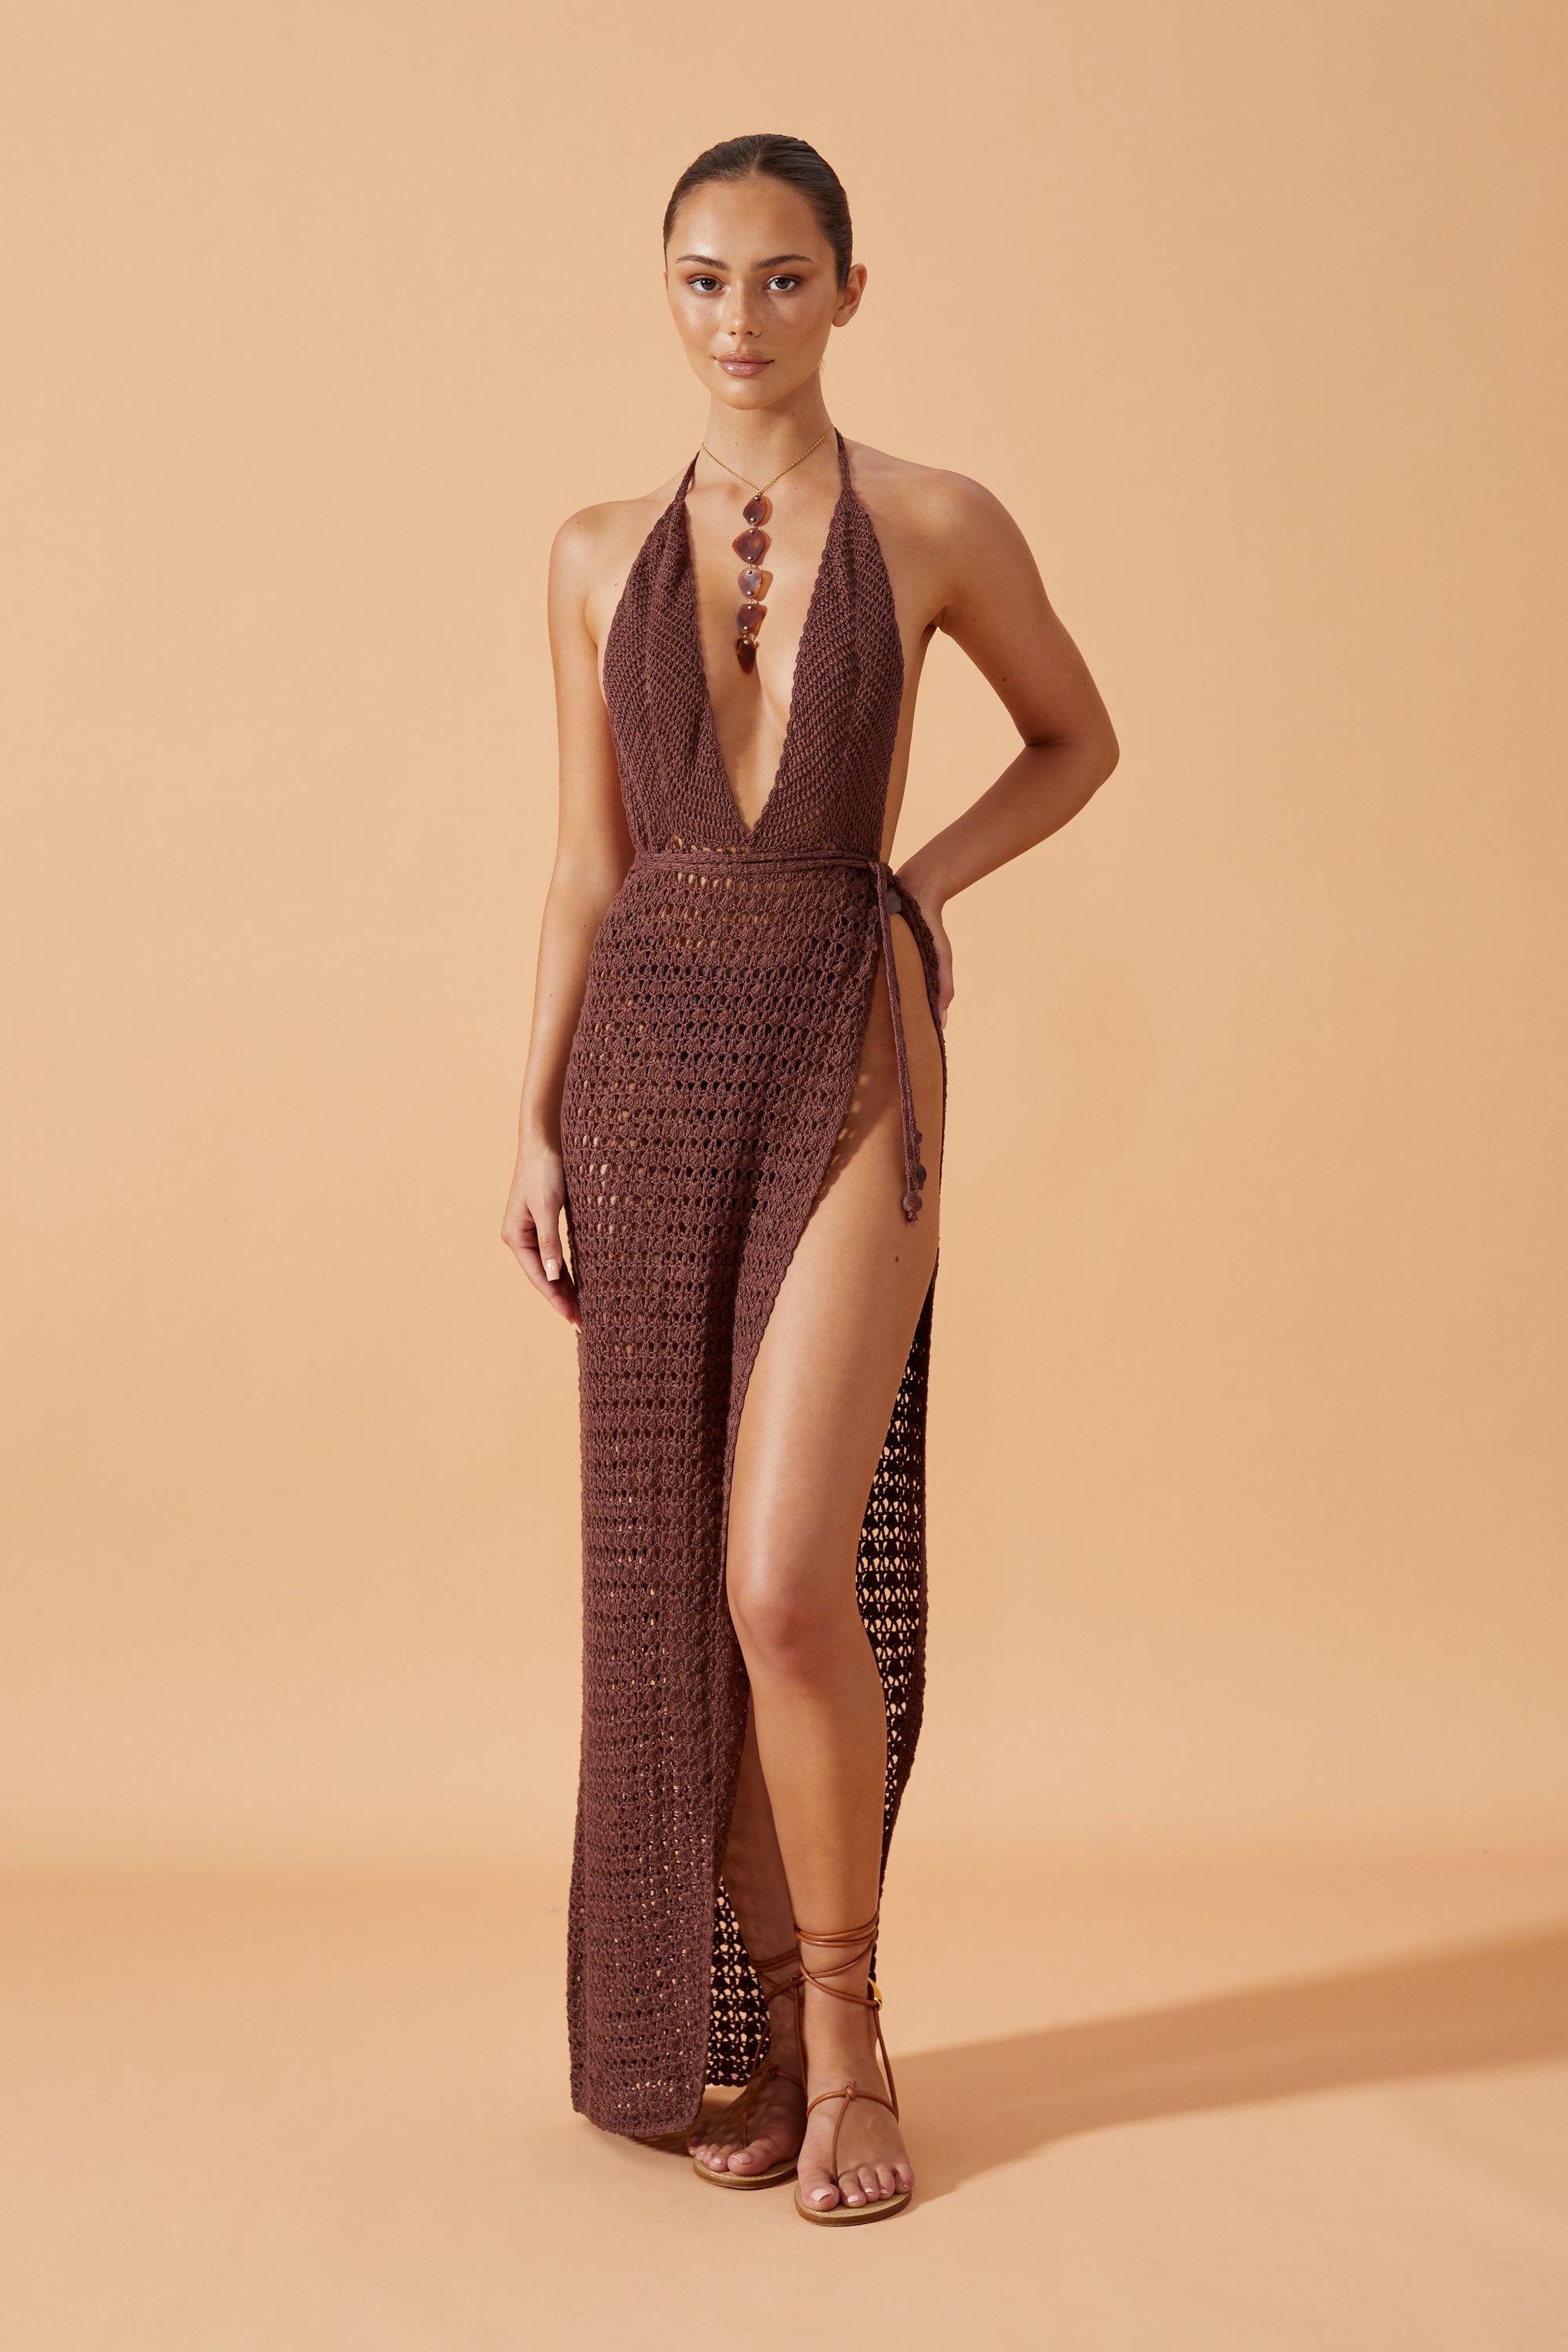 Flook The Label  Zahira  Crochet  Wrao Kong Dress in coconut Husk. Worn with Senso Drop Necklace in tortoise. Front View